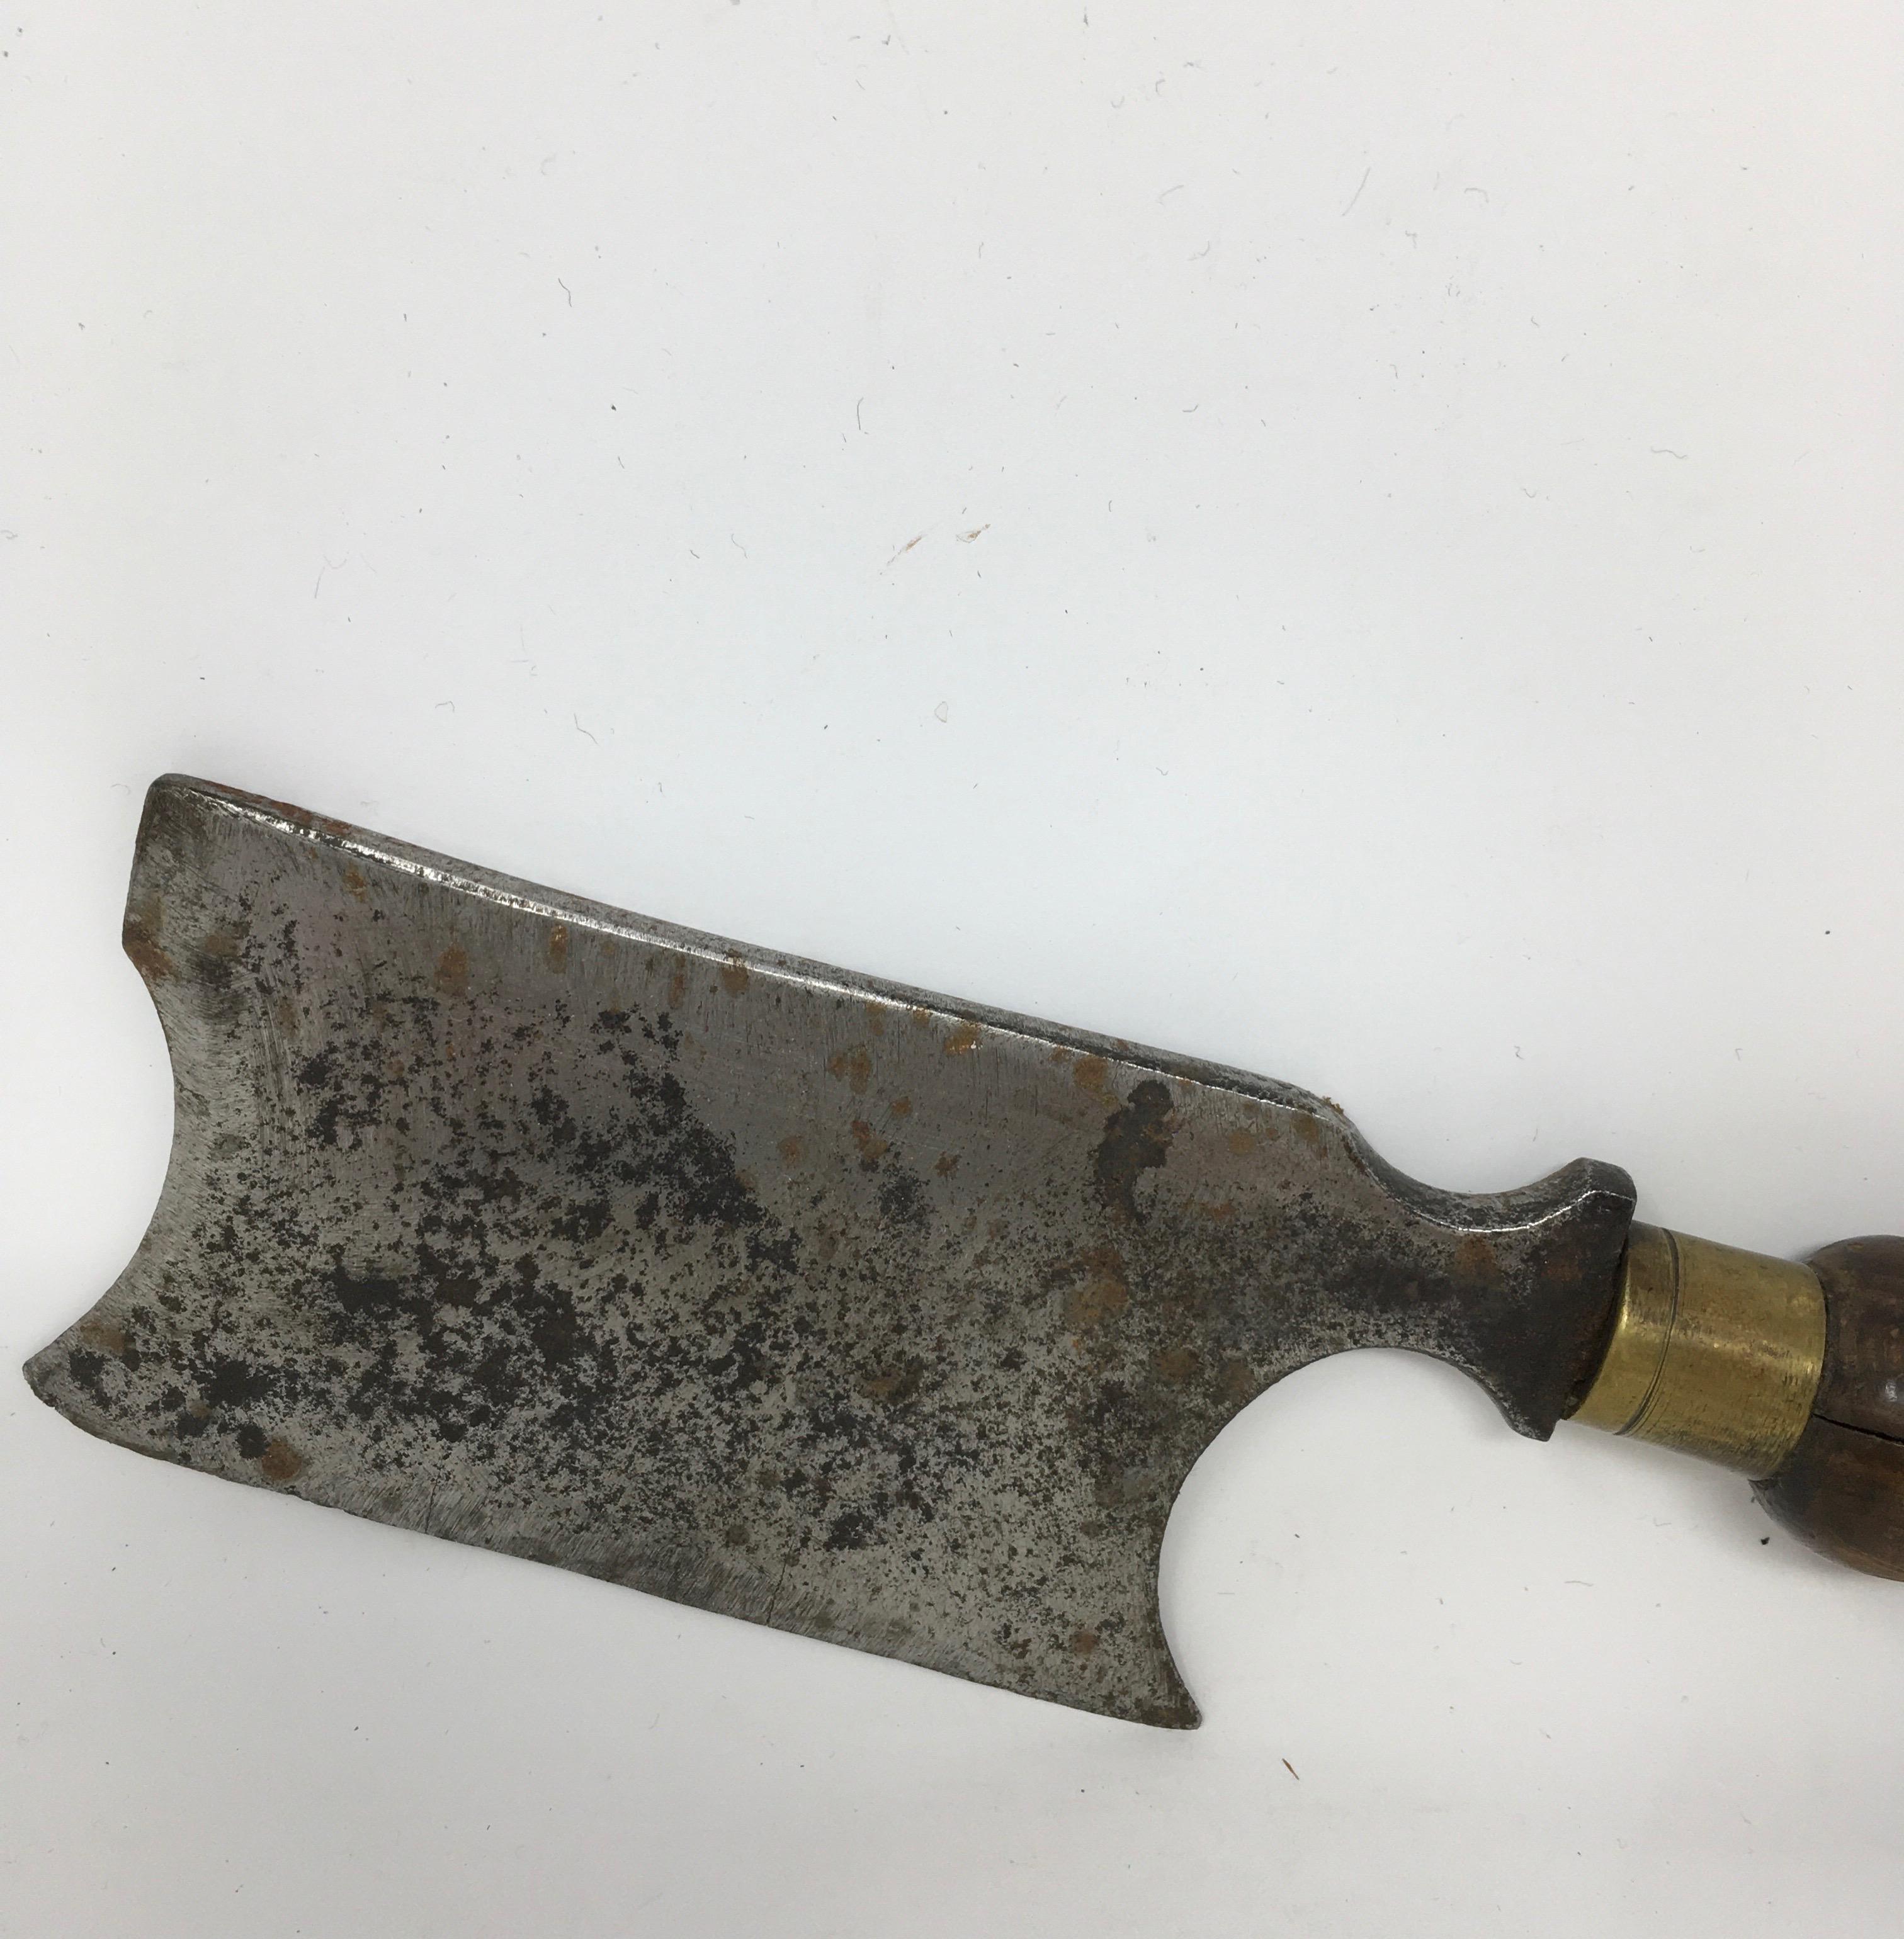 This is an antique butcher's cleaver from France. The blade is made of heavy steel, the handle is wood and brass. Once used by a butcher in a boucherie, this piece is sure to add charm to your kitchen.